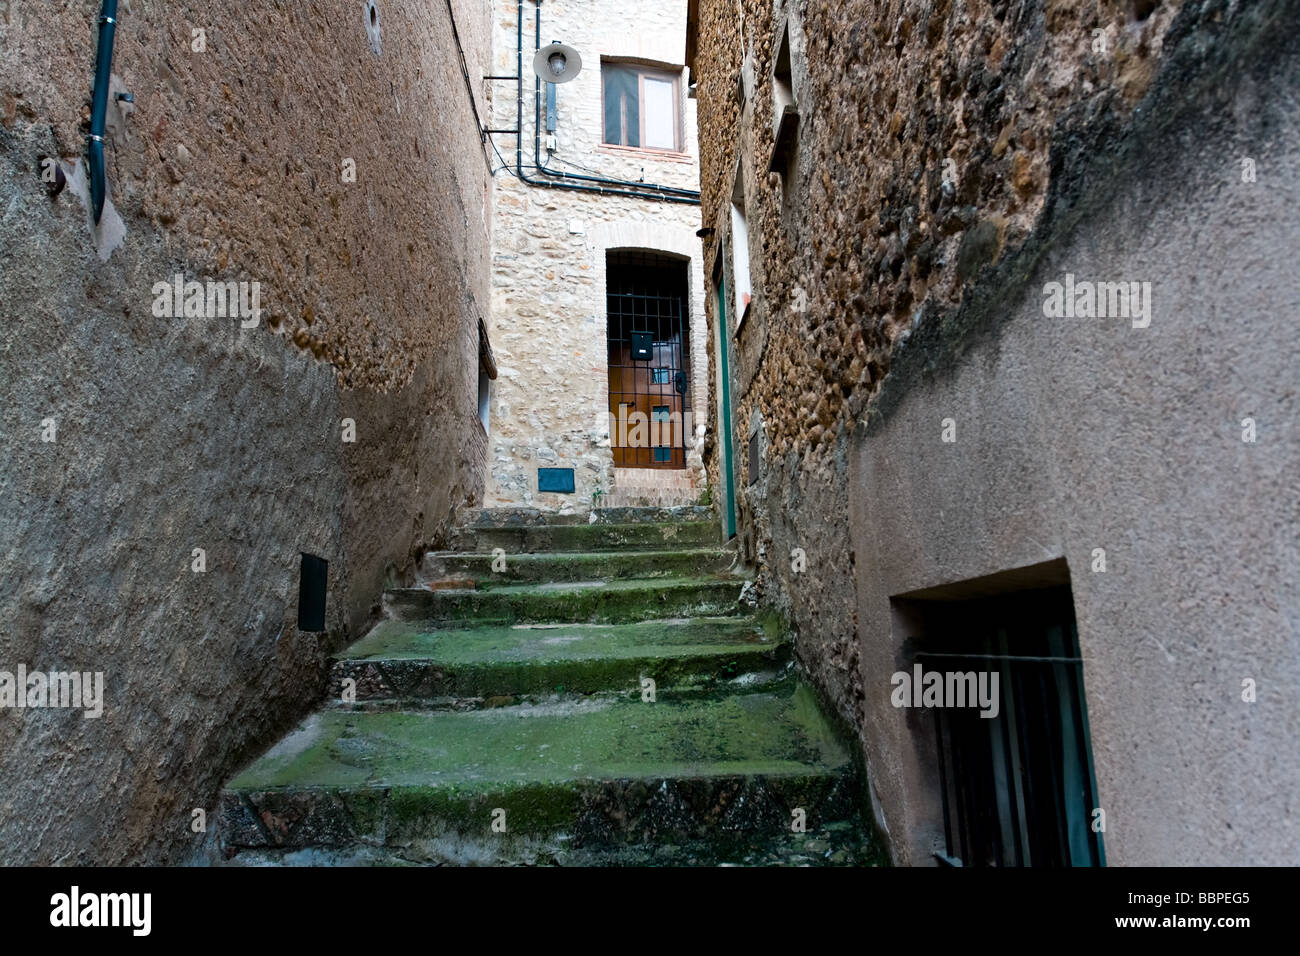 Steps in the village of Llado, Northern Spain. Stock Photo